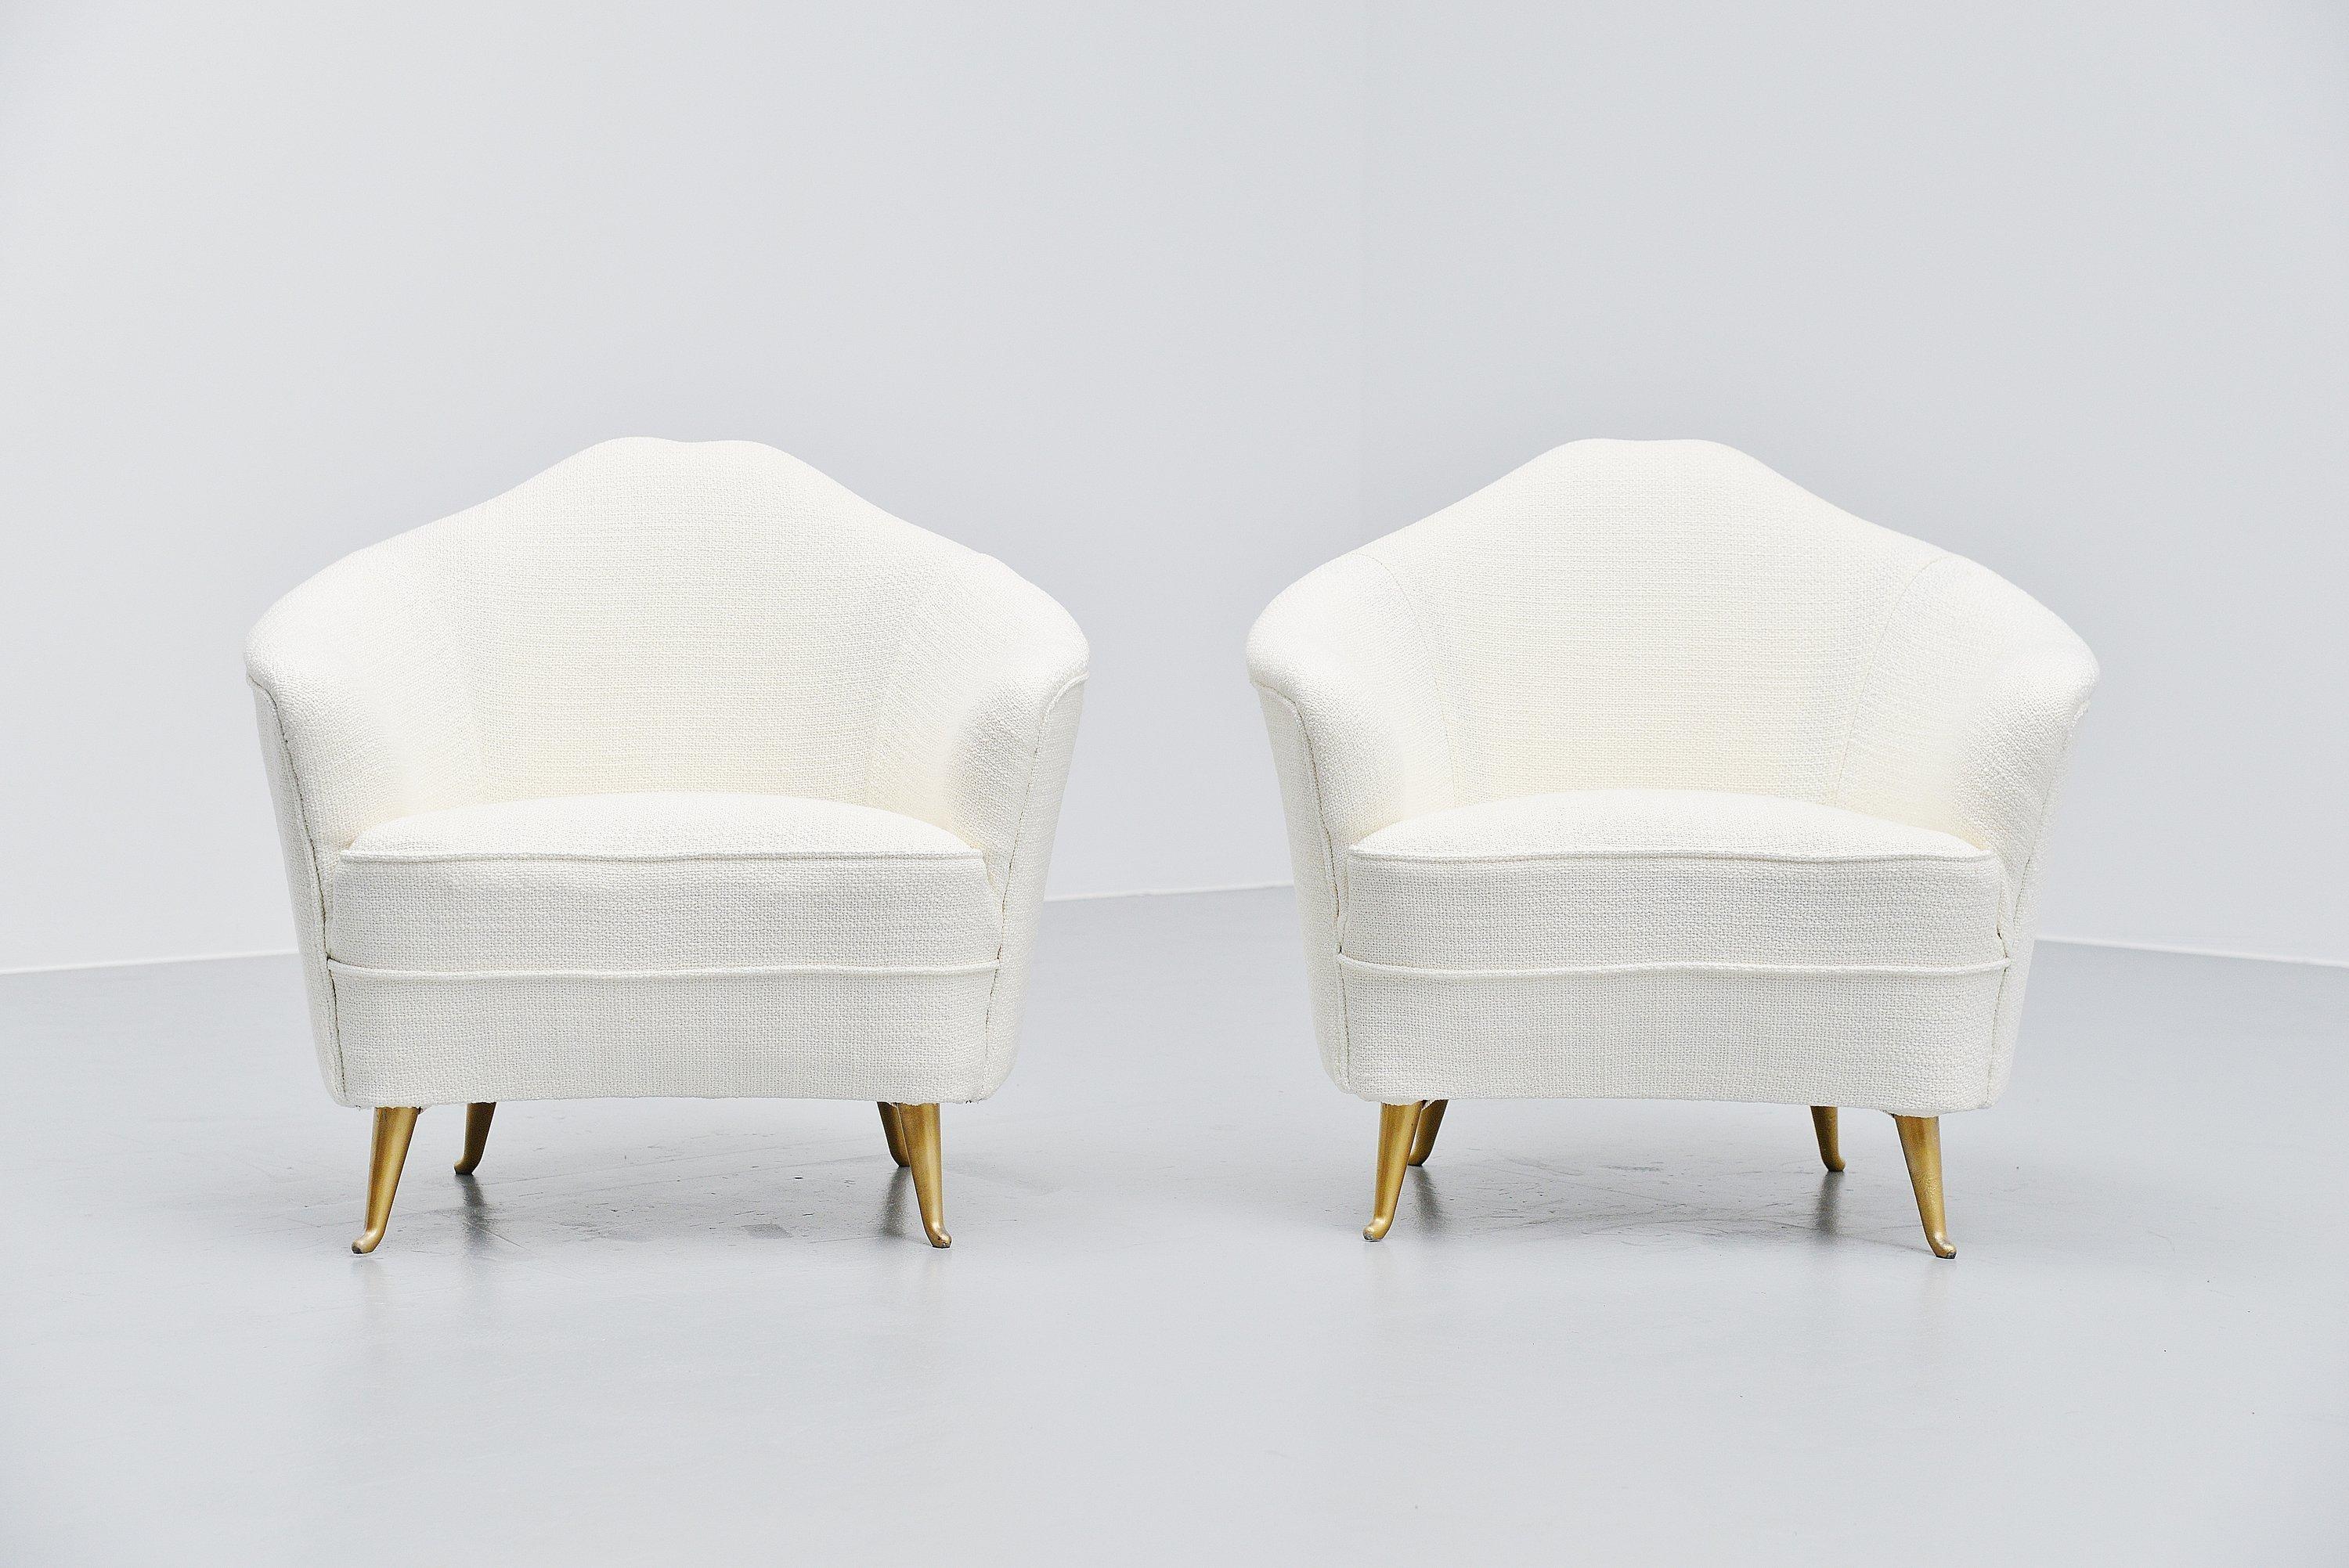 Hand-Painted Isa Bergamo Club Chairs Pair, Italy, 1950 For Sale